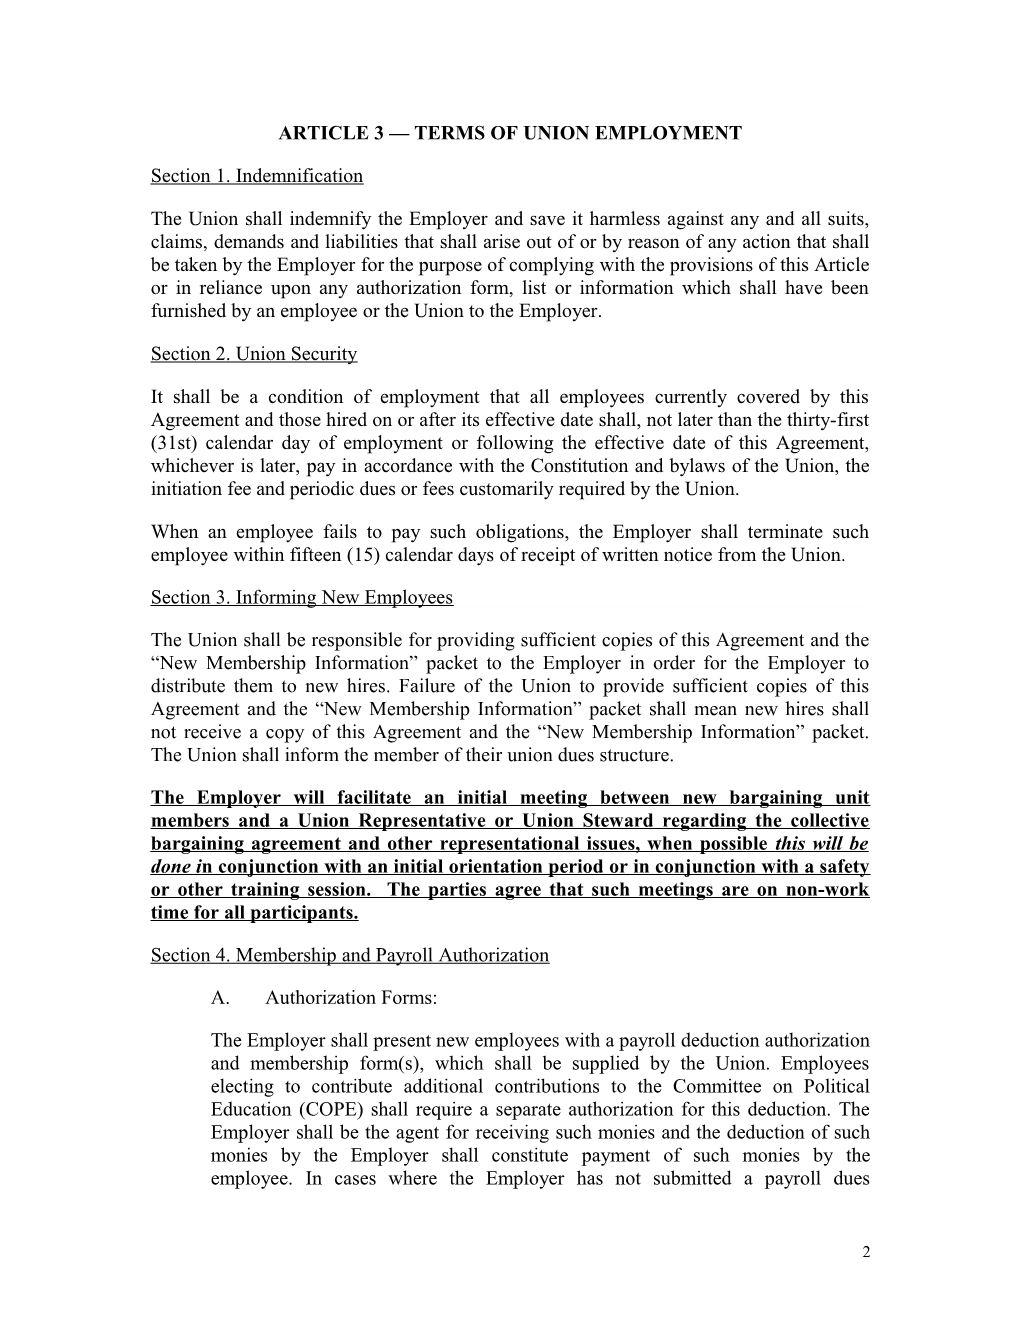 Master Janitorial Agreement 9-8-03